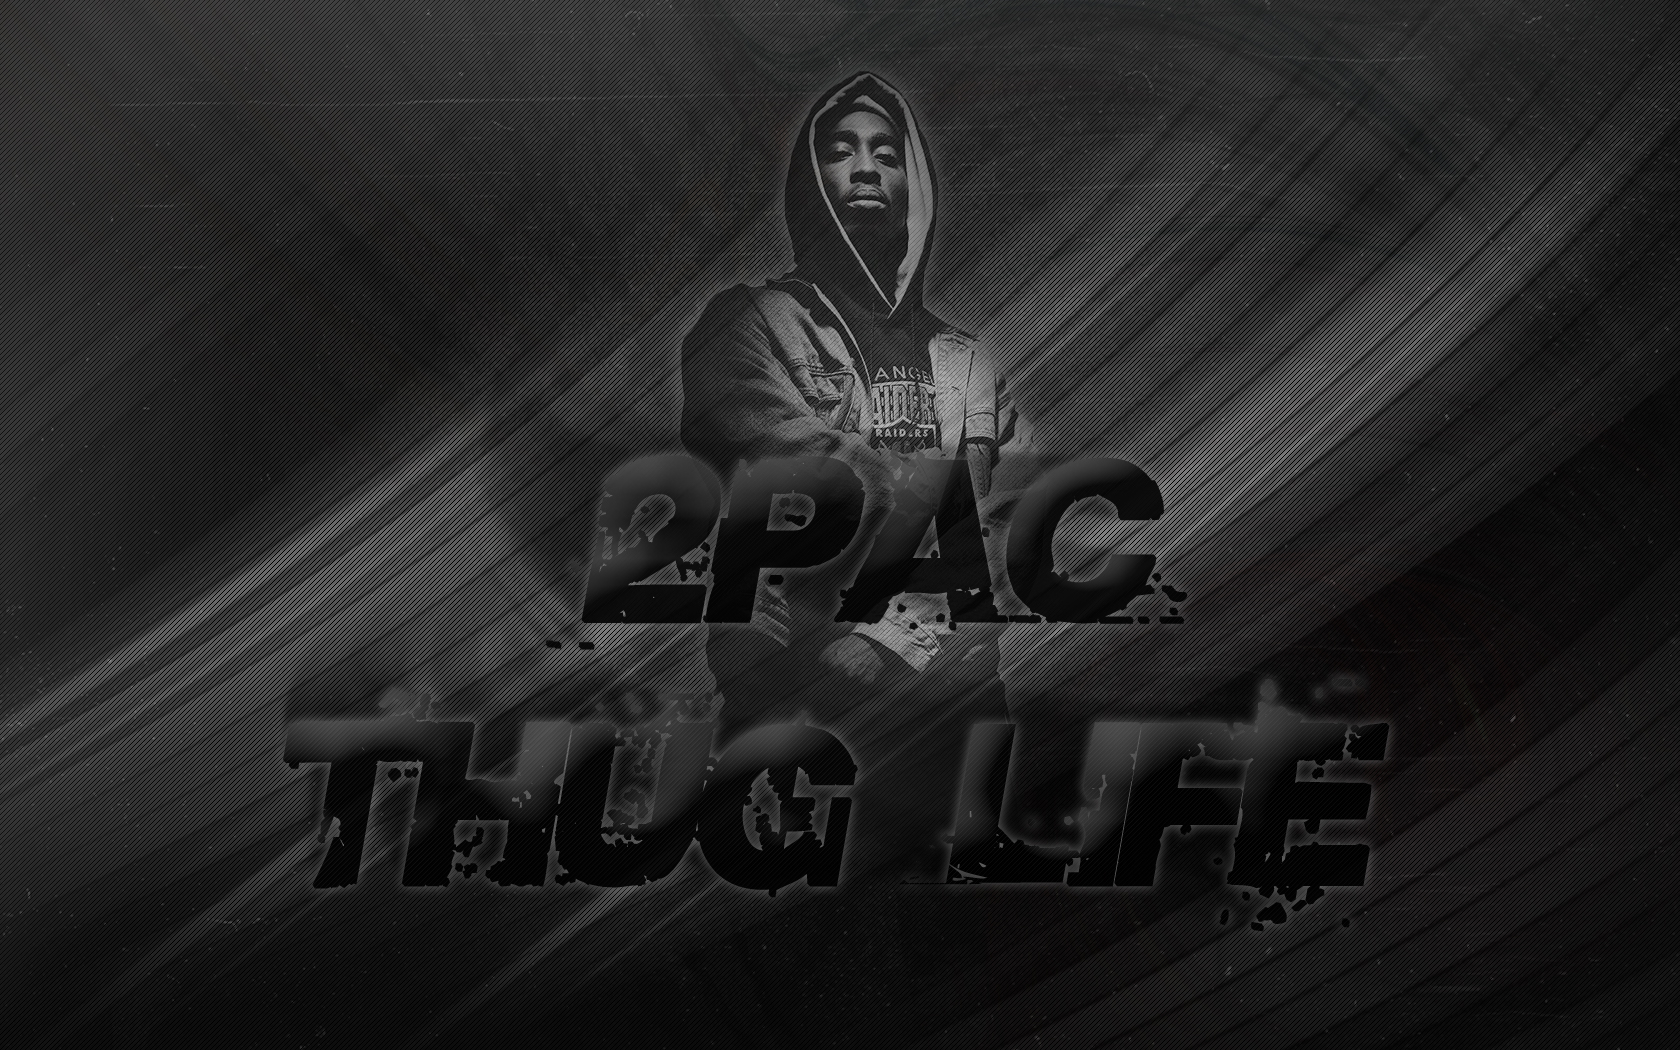  wallpaper people males 2010 2015 curtisblade 2pac thug life wallpaper 1680x1050